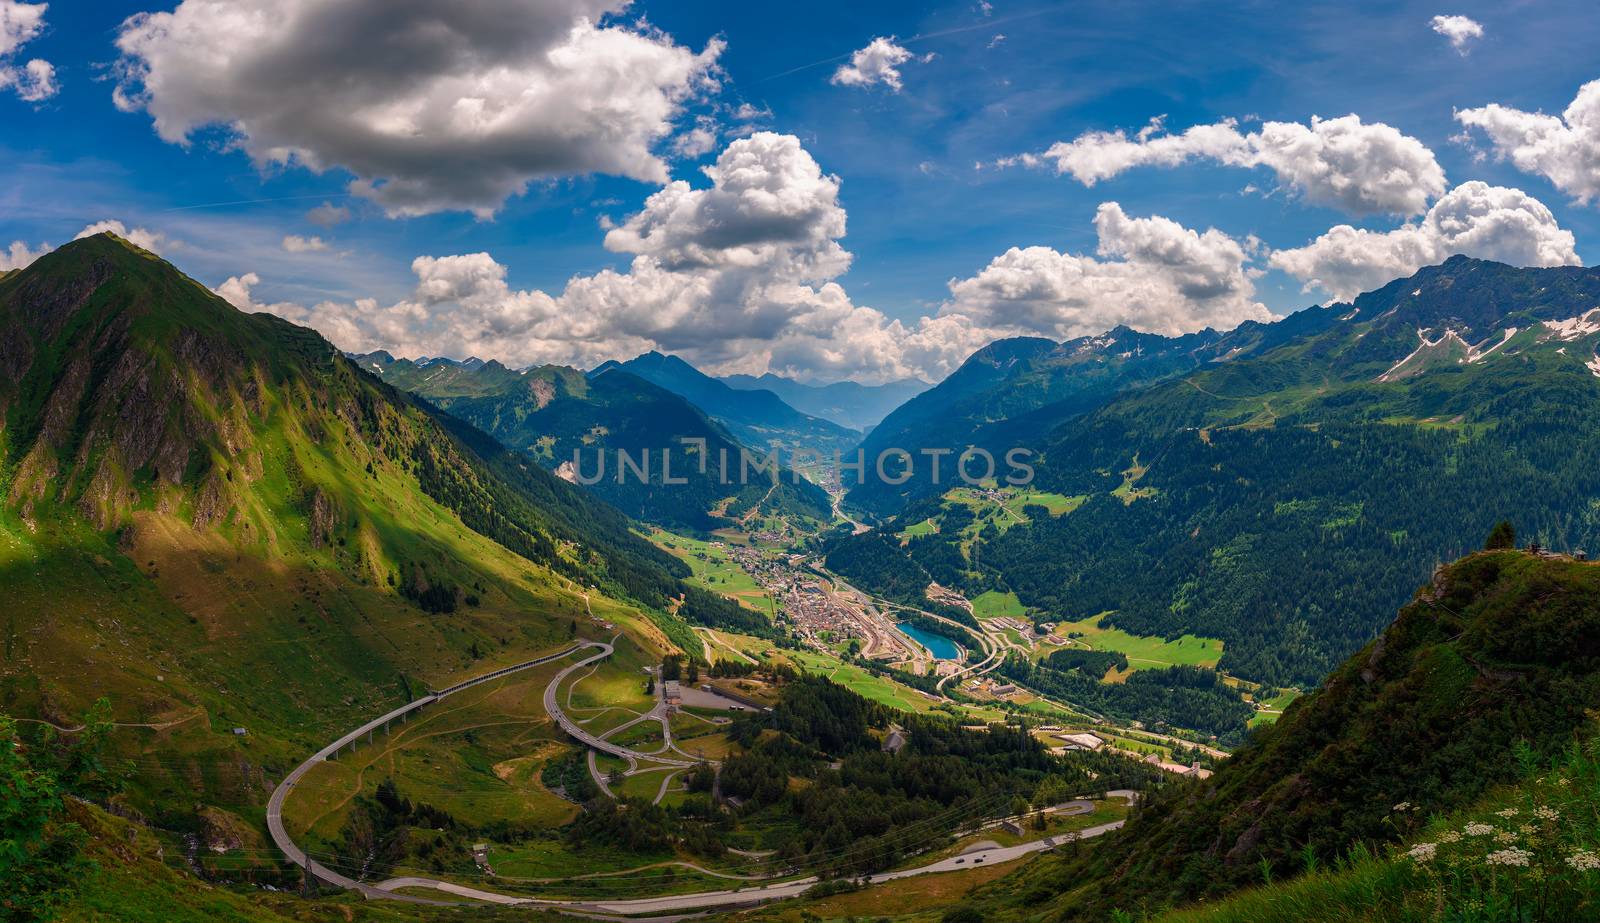 Chiosco Panorama San Gottardo in Switzerland found on the Saint Gotthard road offering one of the most breath-taking views in Canton Ticino.